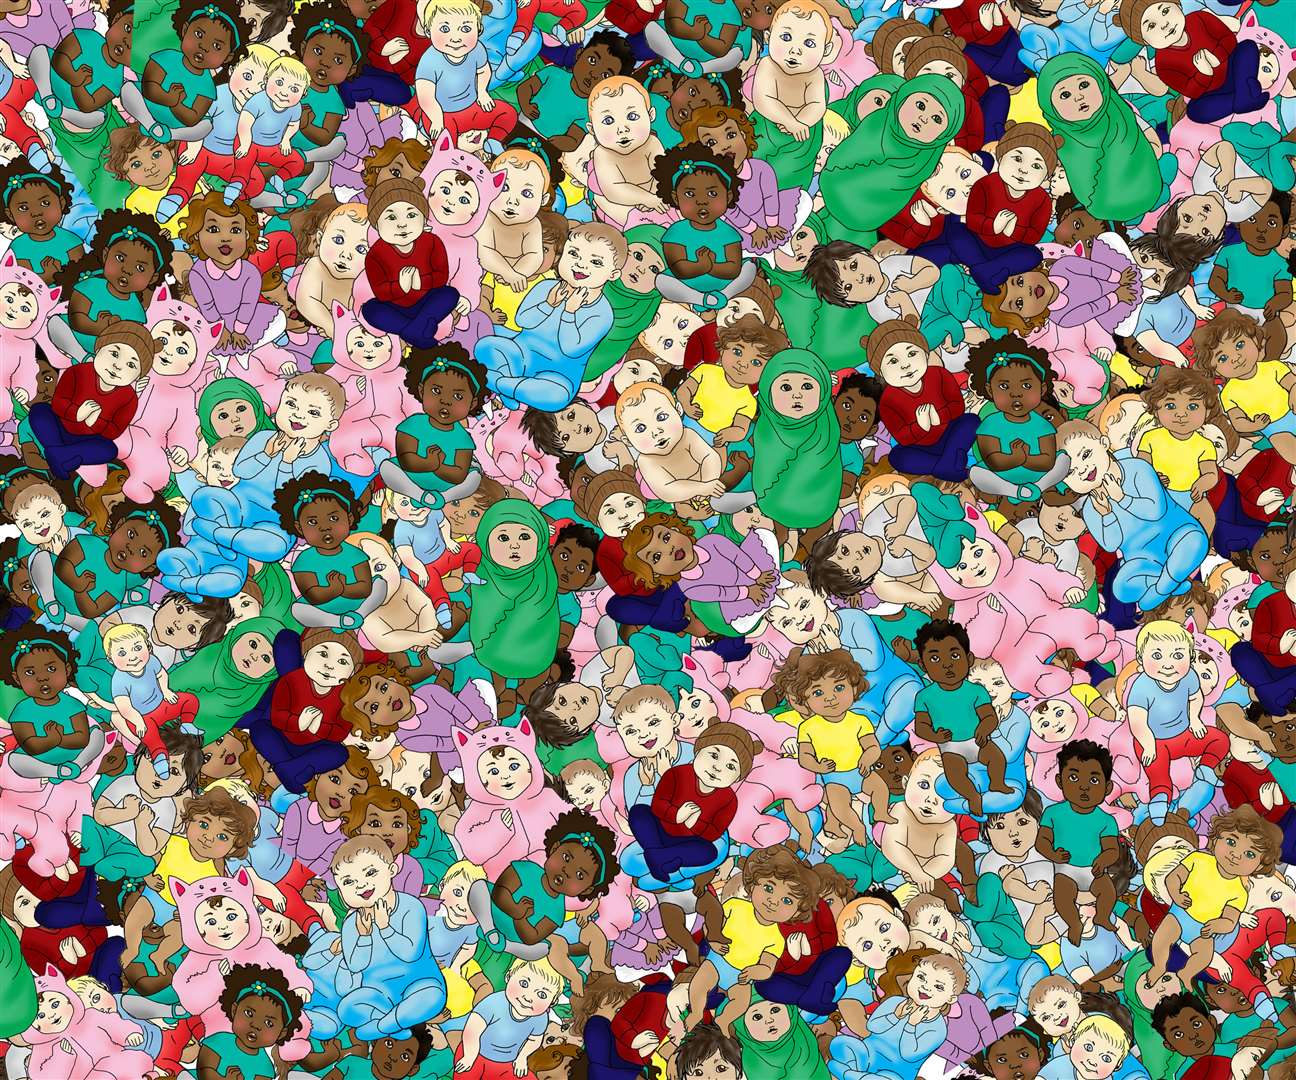 Can you spot the snoozing baby among the wide-awake tots? Scroll down to the bottom of the story for the solution